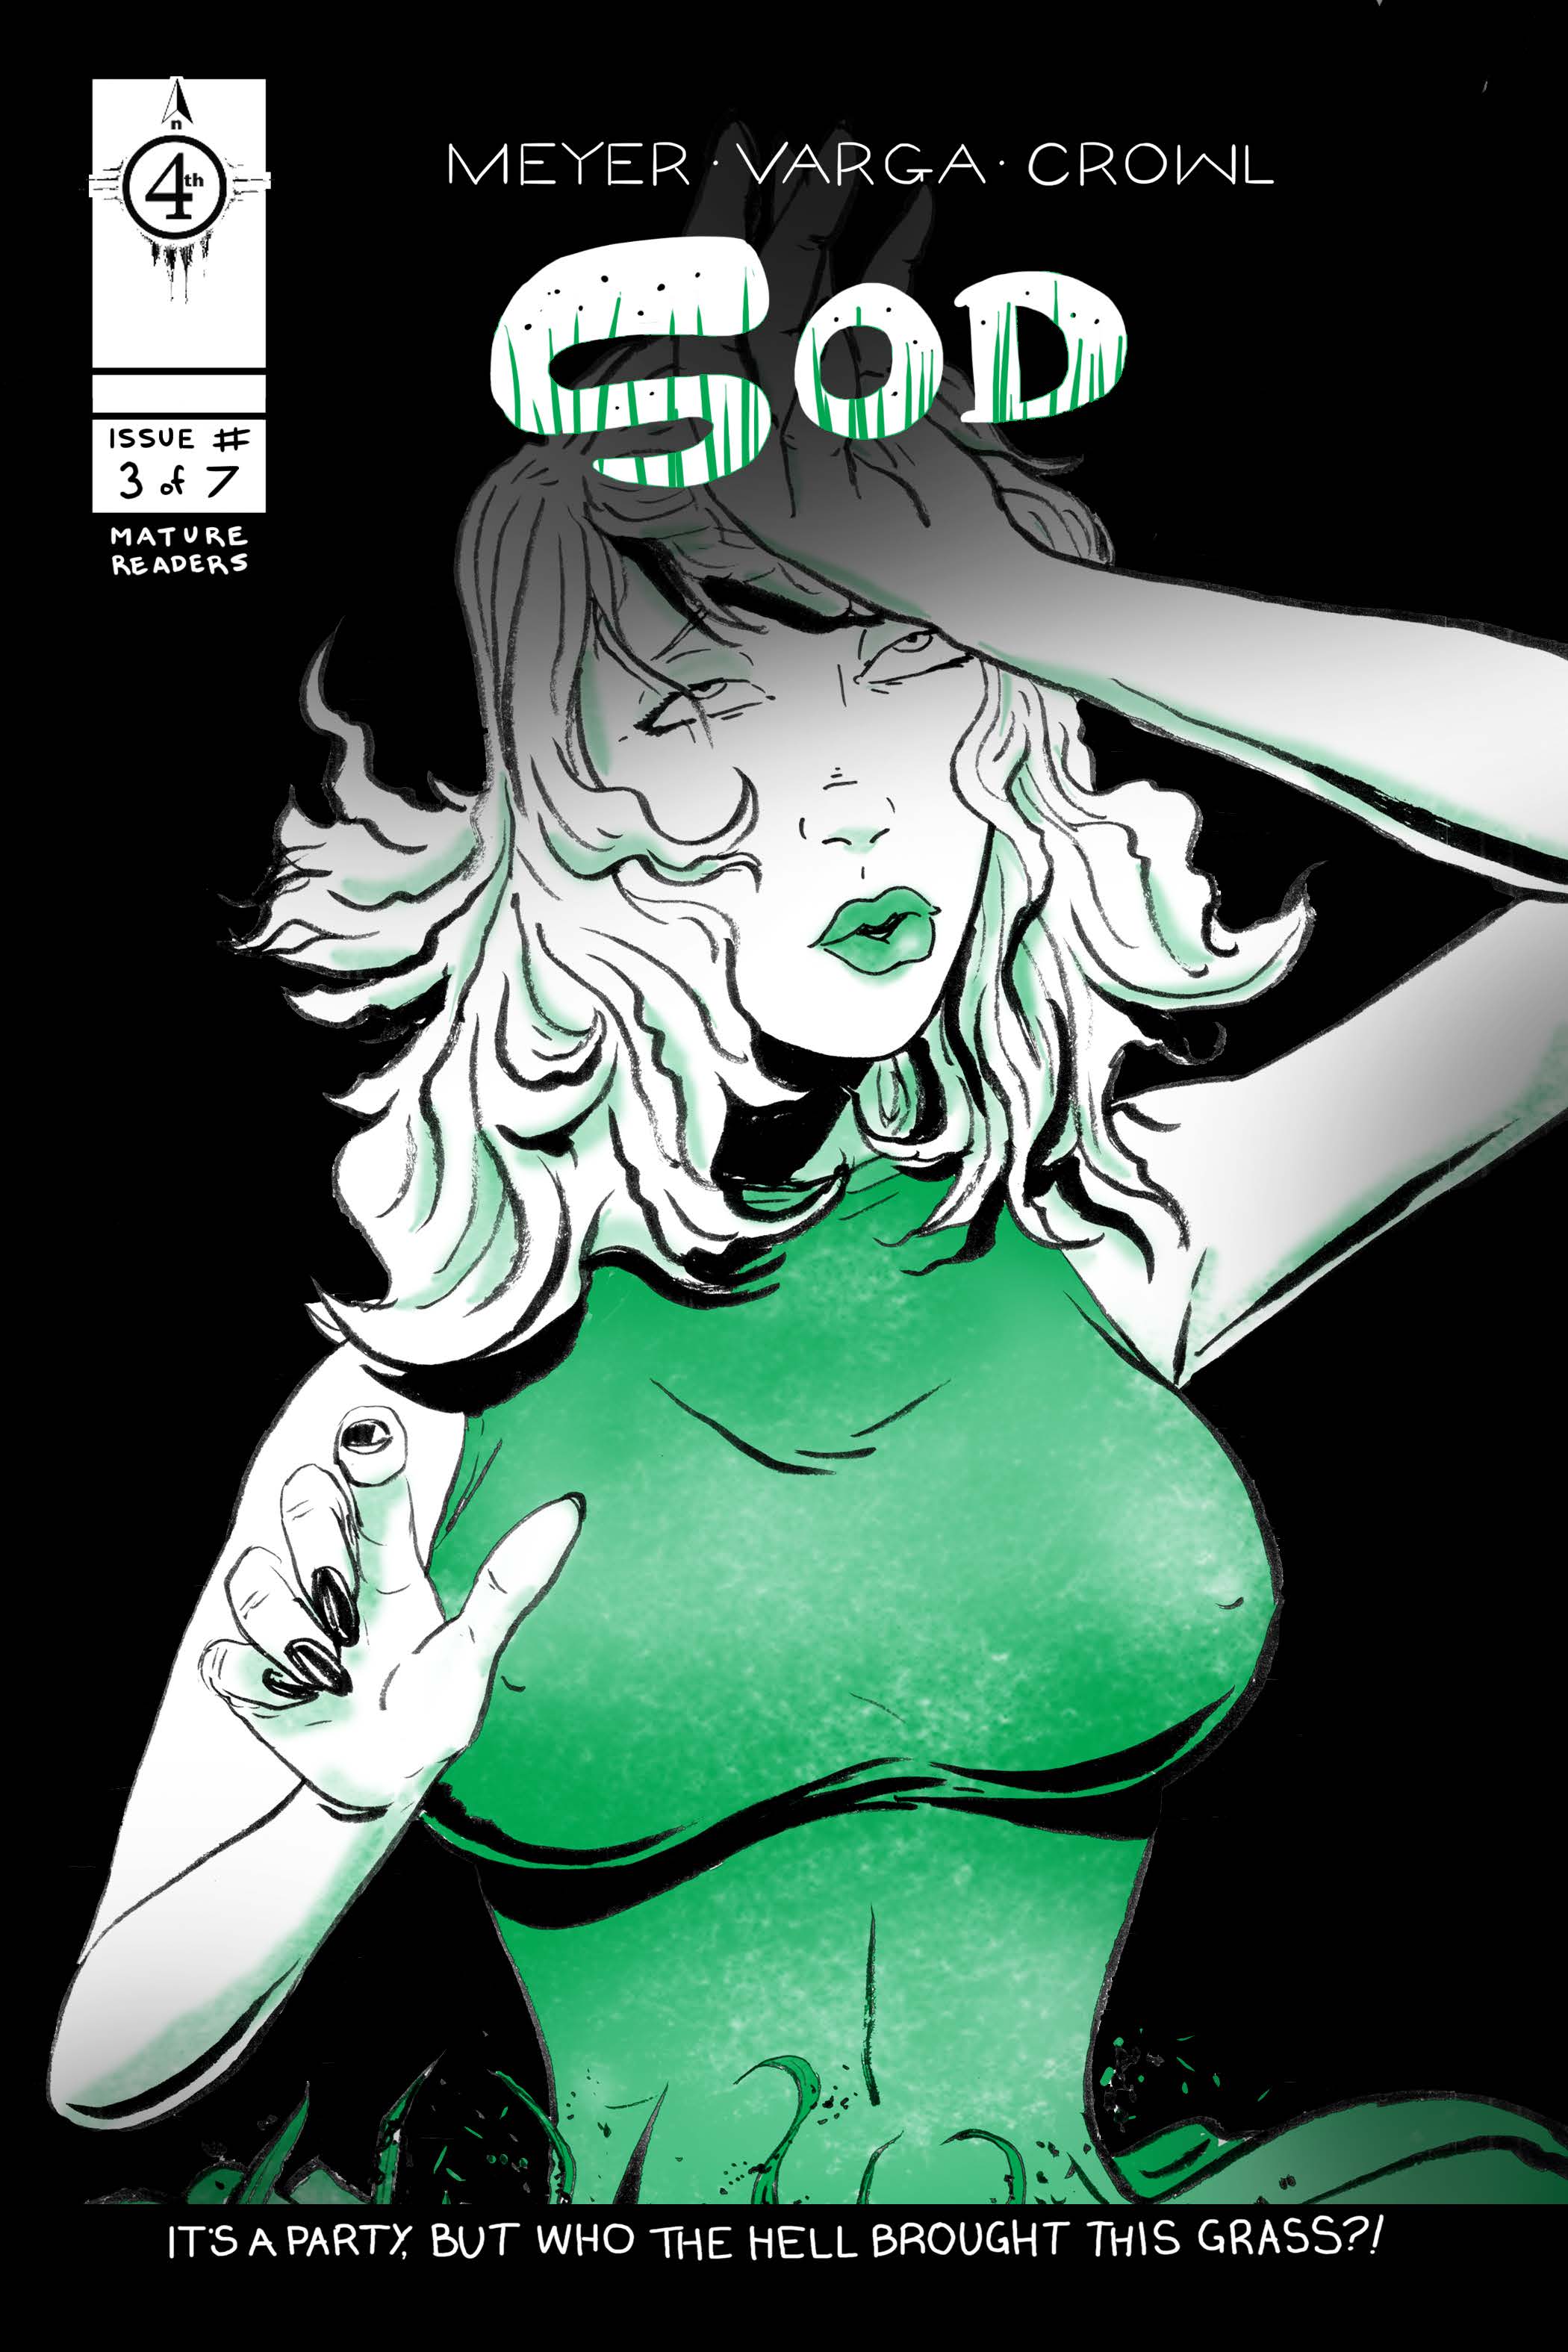 Sod issue 03 cover - Jasey Crowl Draws